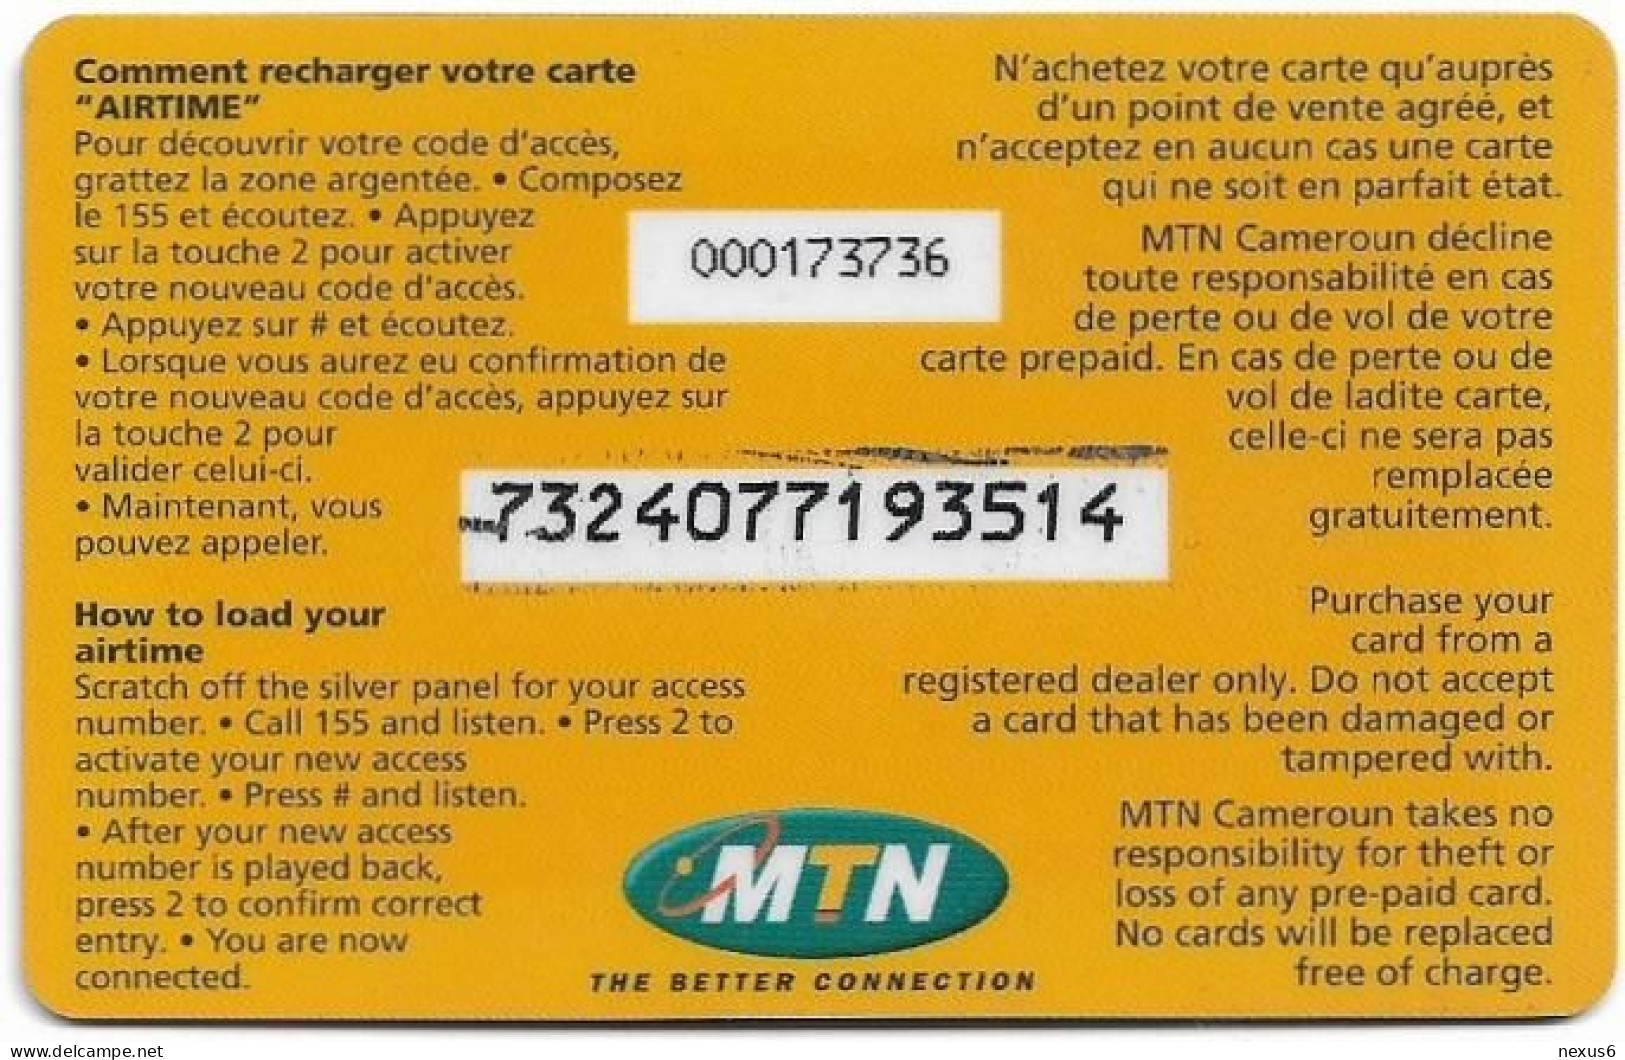 Cameroon - MTN - Airtime ConnectaPlan, GSM Refill 10.000FCFA, Used - Kamerun